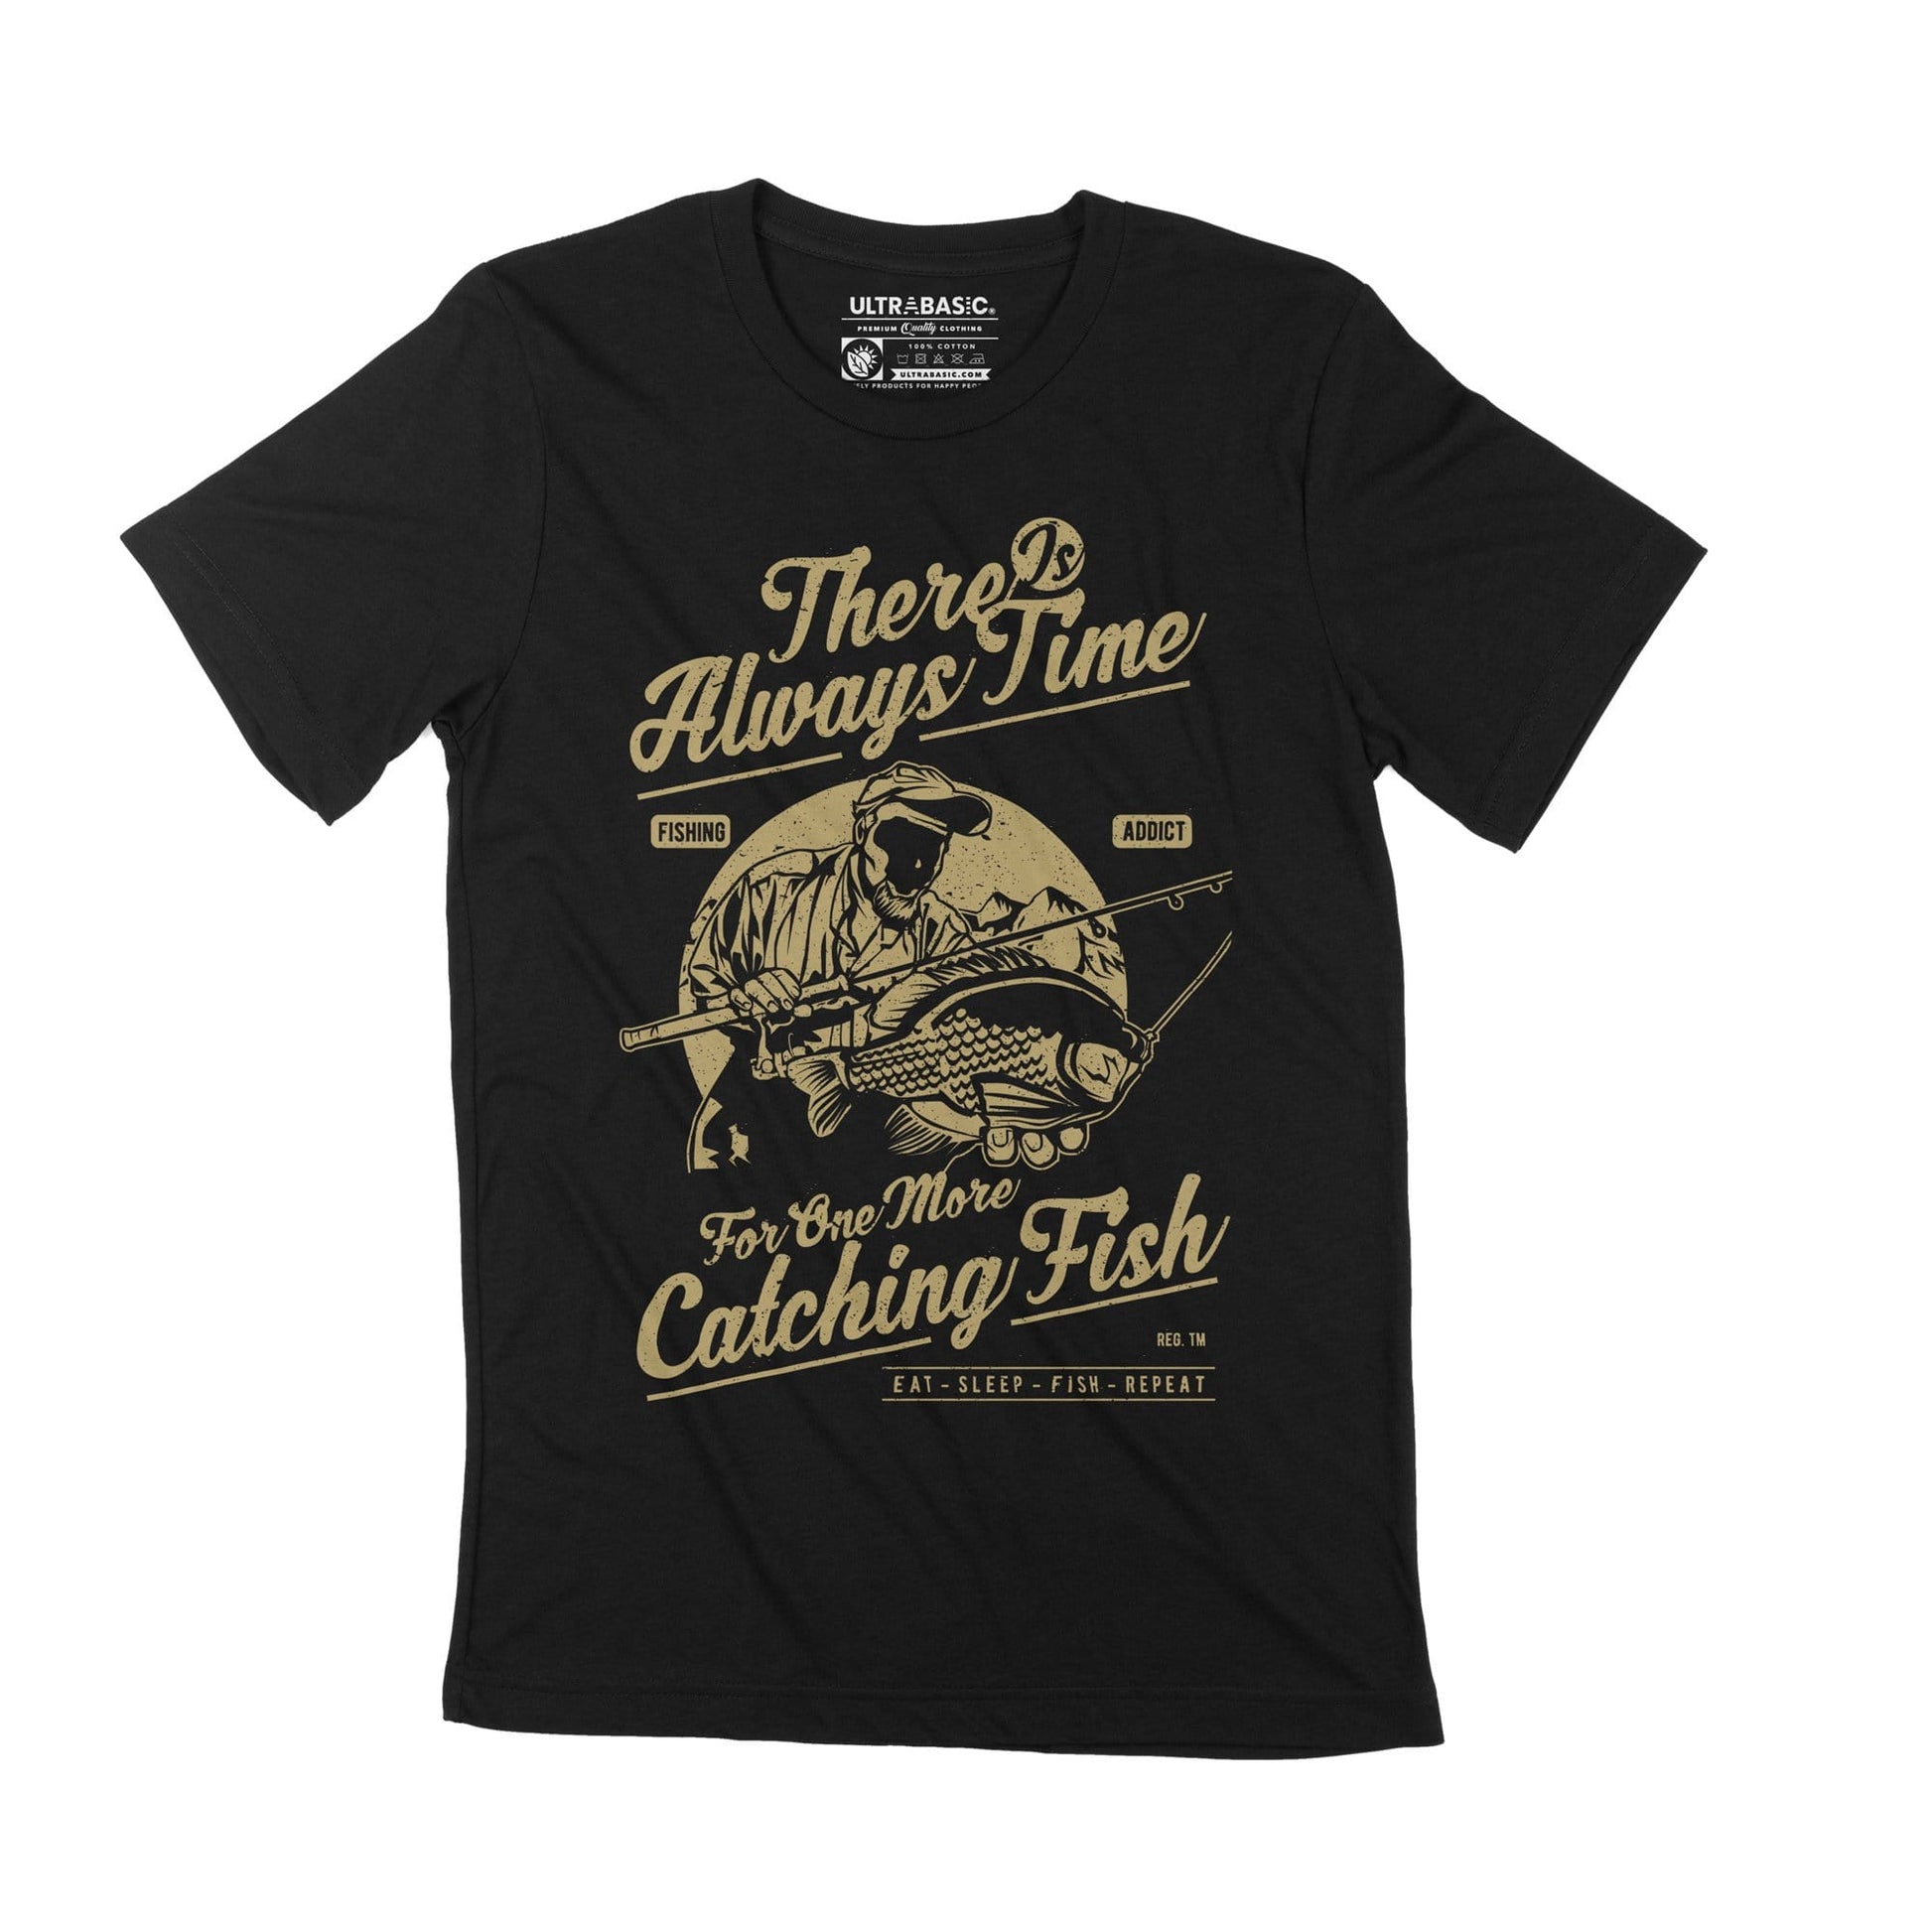 ULTRABASIC Men's T-Shirt One More Catching Fish - Fishing Addict Graphic Tee angler present fisher fathers day captain fisherwoman boat dad vacation funny husband grandpa quotes apparel mercandise letter clothing womens christmas novelty unisex classic guys hooker adult casual outfits print dad brother sport